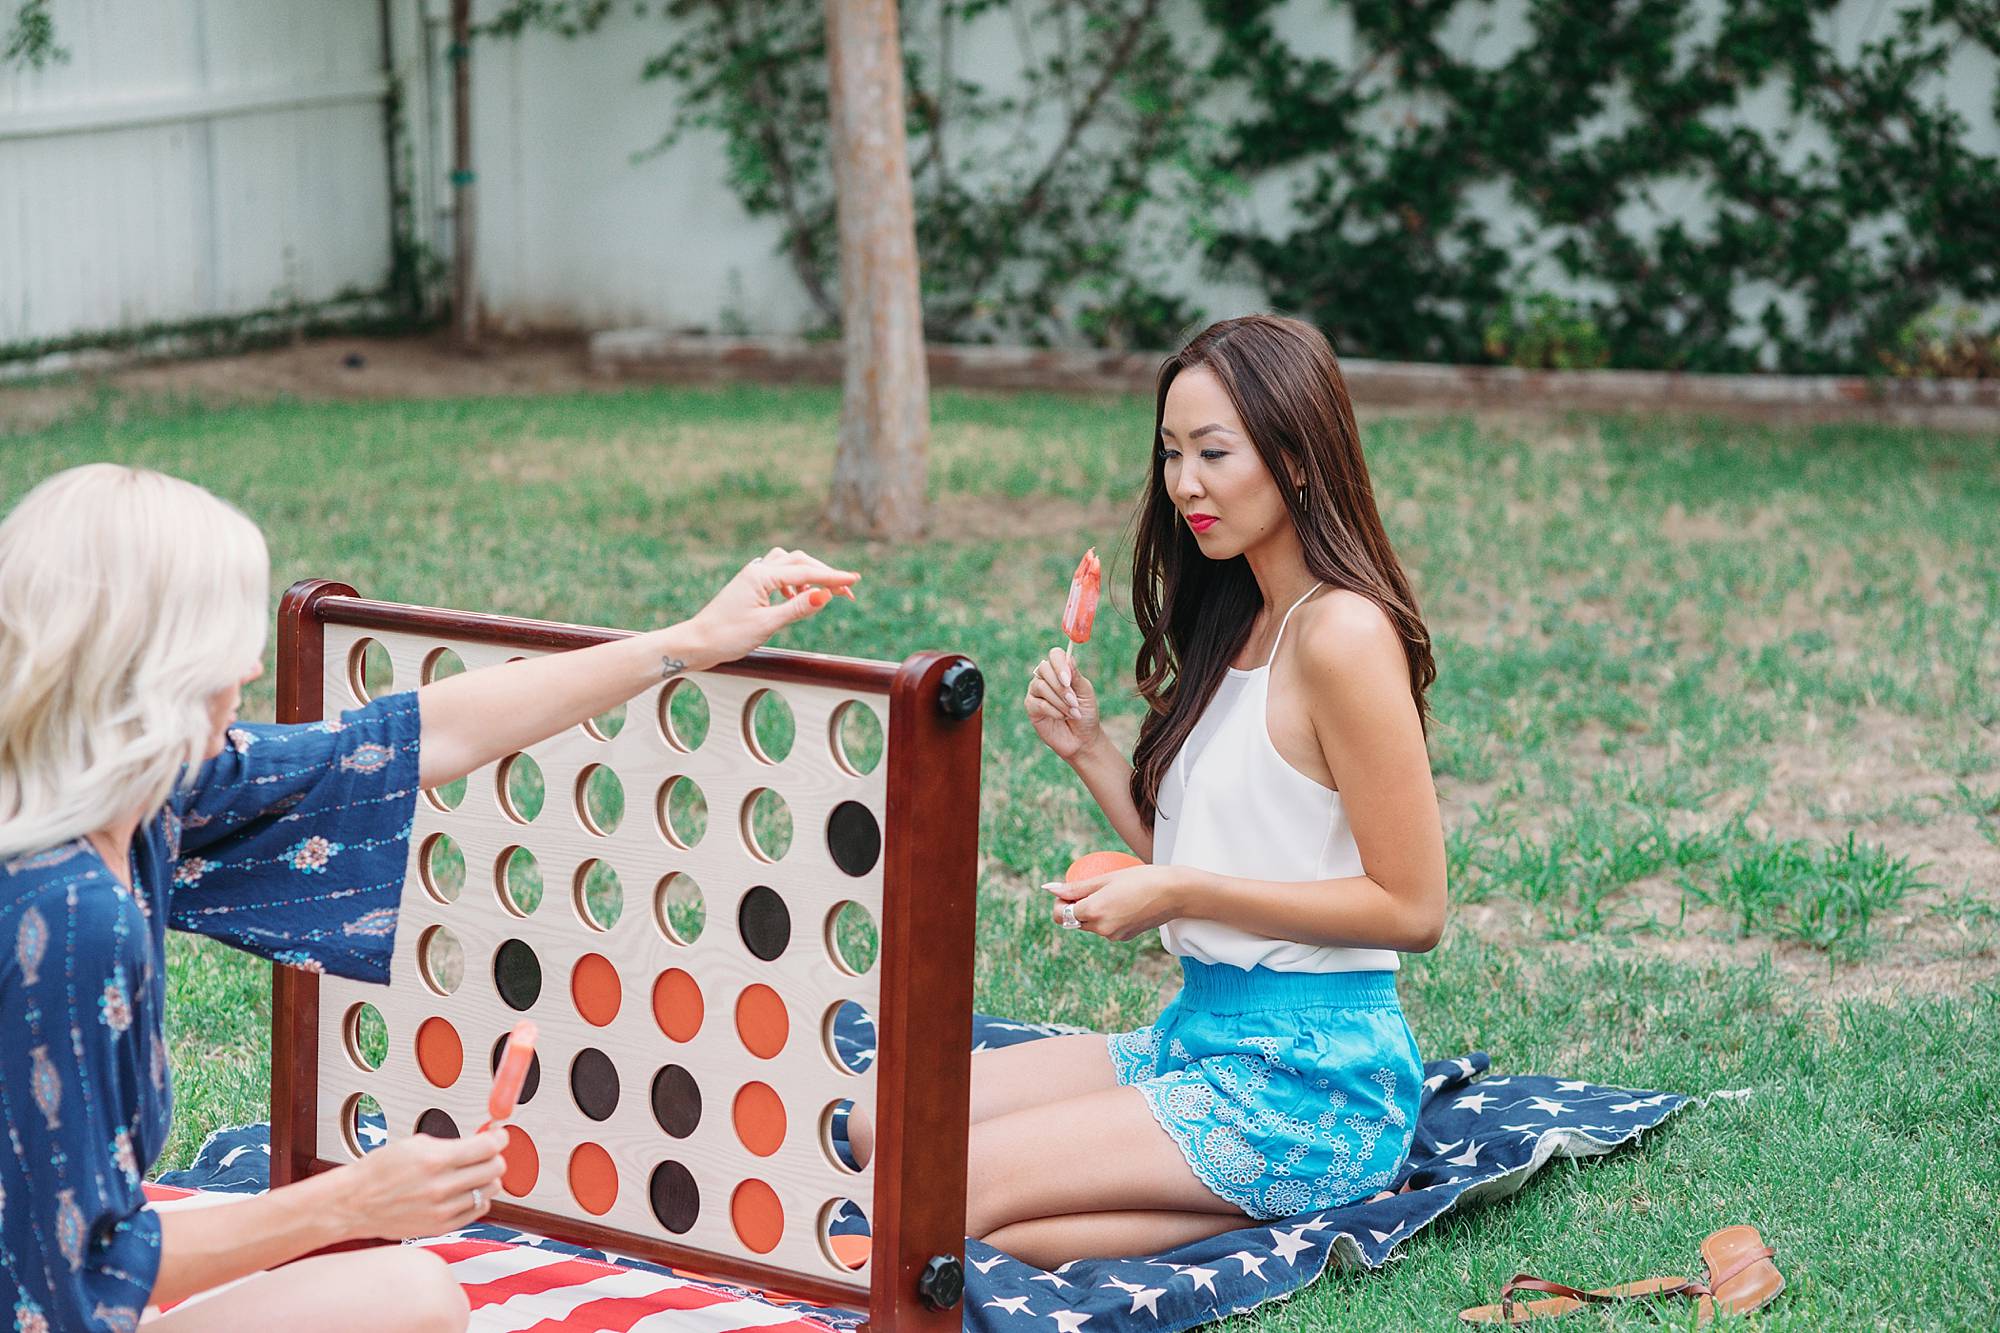 giant connect 4 in-a-row game for summer fun lawn game beach